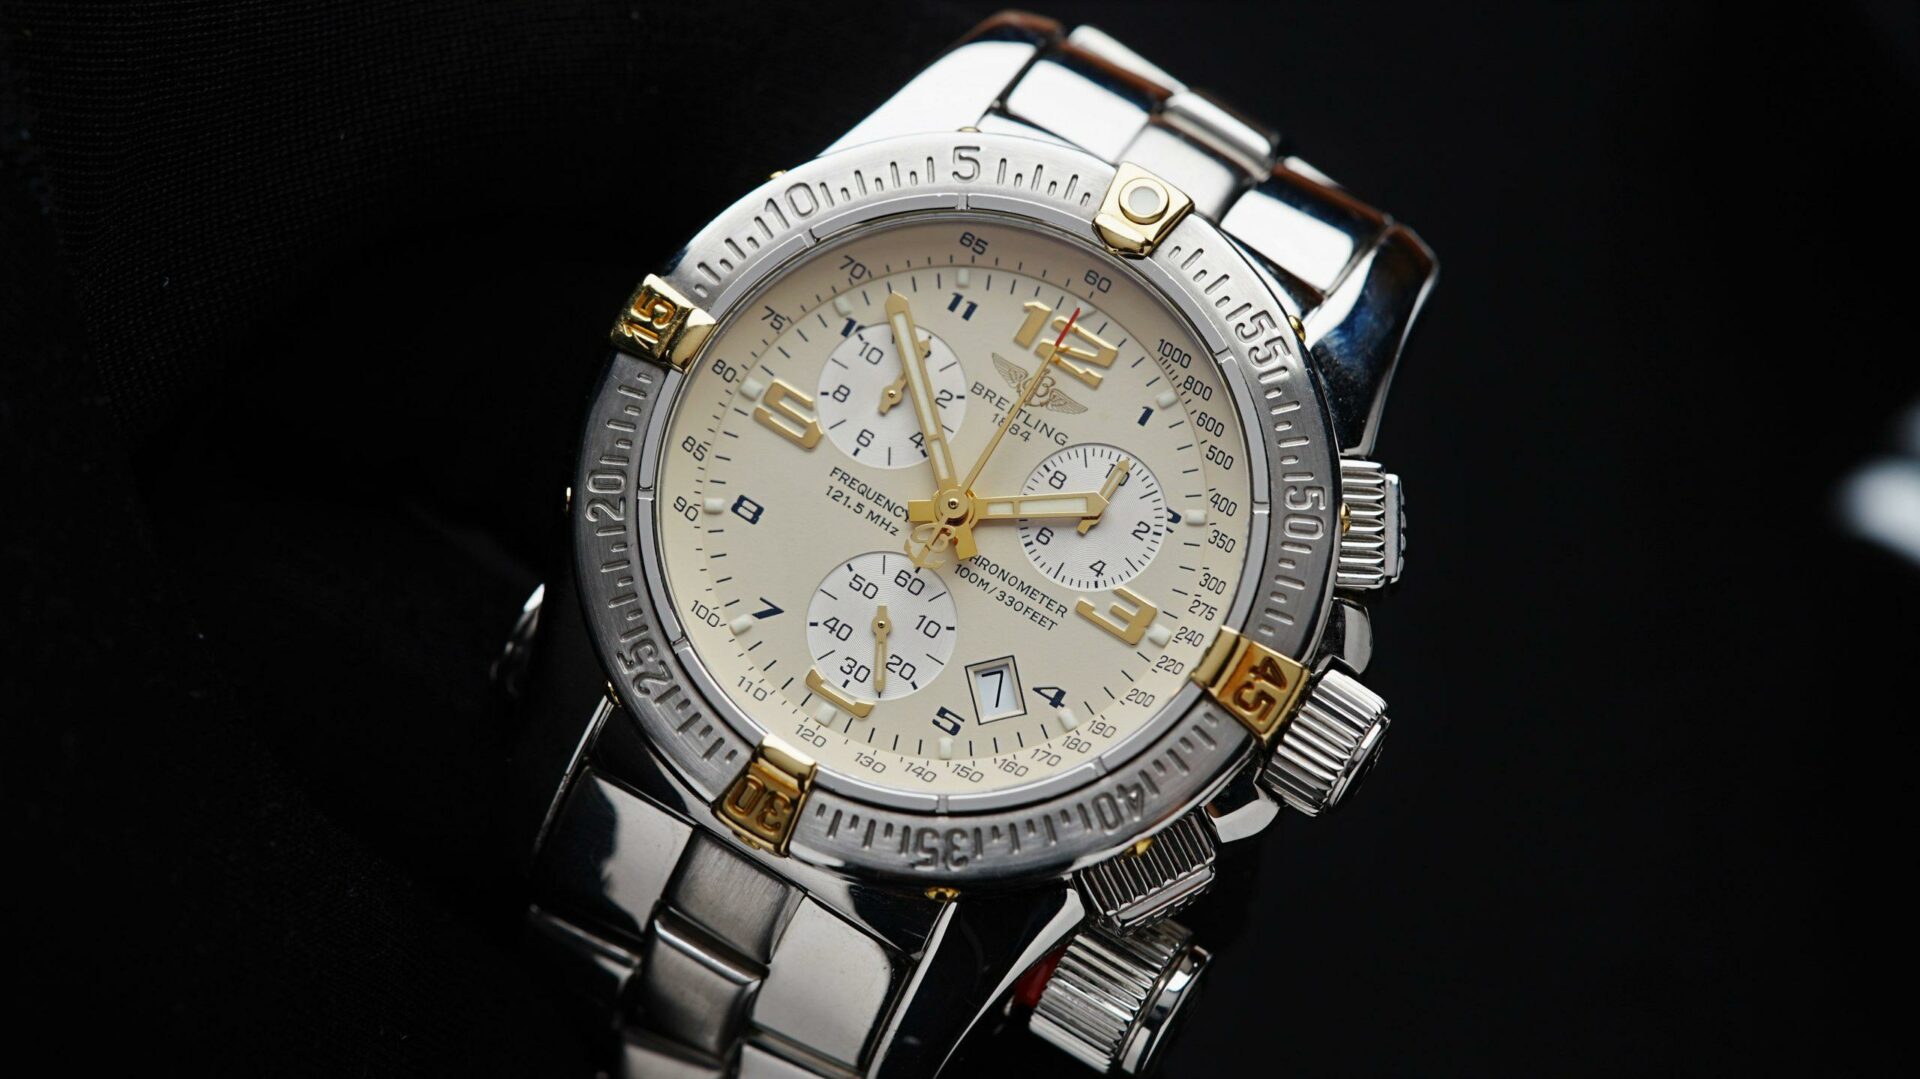 Breitling Emergency Mission watch close up picture.